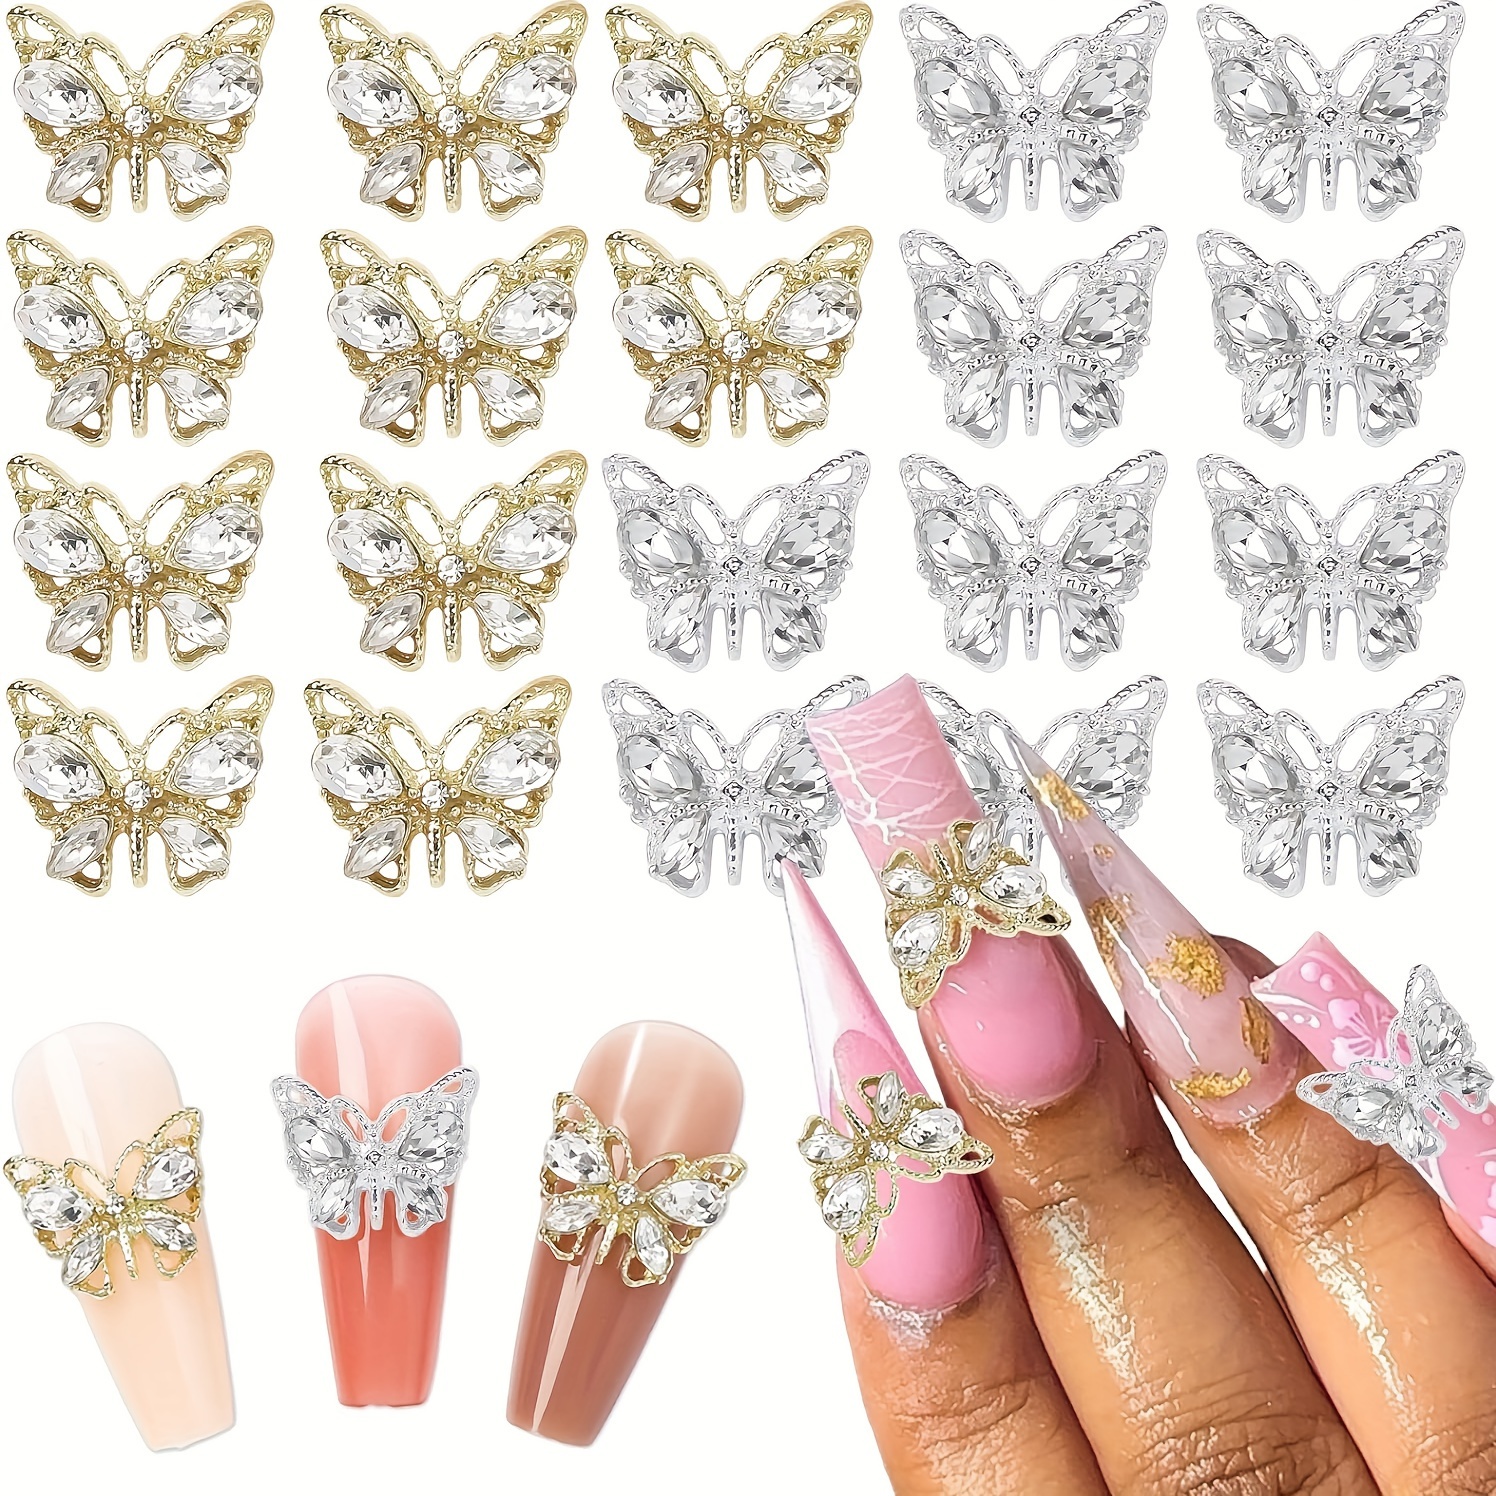 

40pcs Luxury Butterfly Nail Charms 3d Nail Diamond Shiny Butterfly Nail Gems Gold Silver Butterfly Nail Rhinestones For Acrylic Nails Nail Art Supplies Nail Gems For Women Girls Manicure